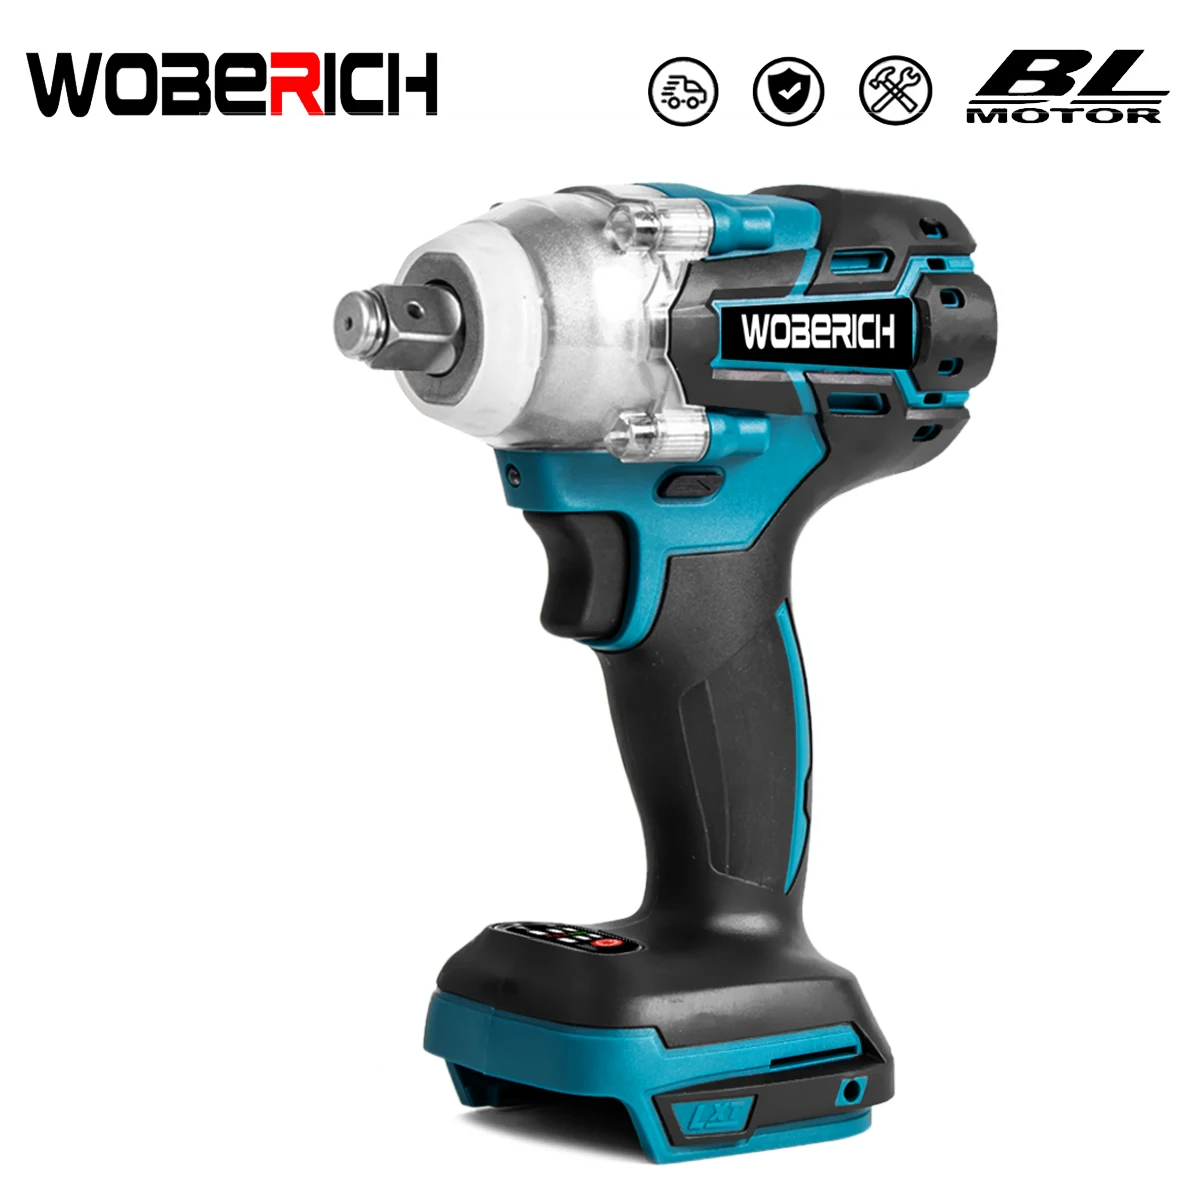 

18V 520N.m Cordless Brushless Impact Wrench Stepless Speed Change Switch Hand Drill DIY Tool For 18V Makita battery